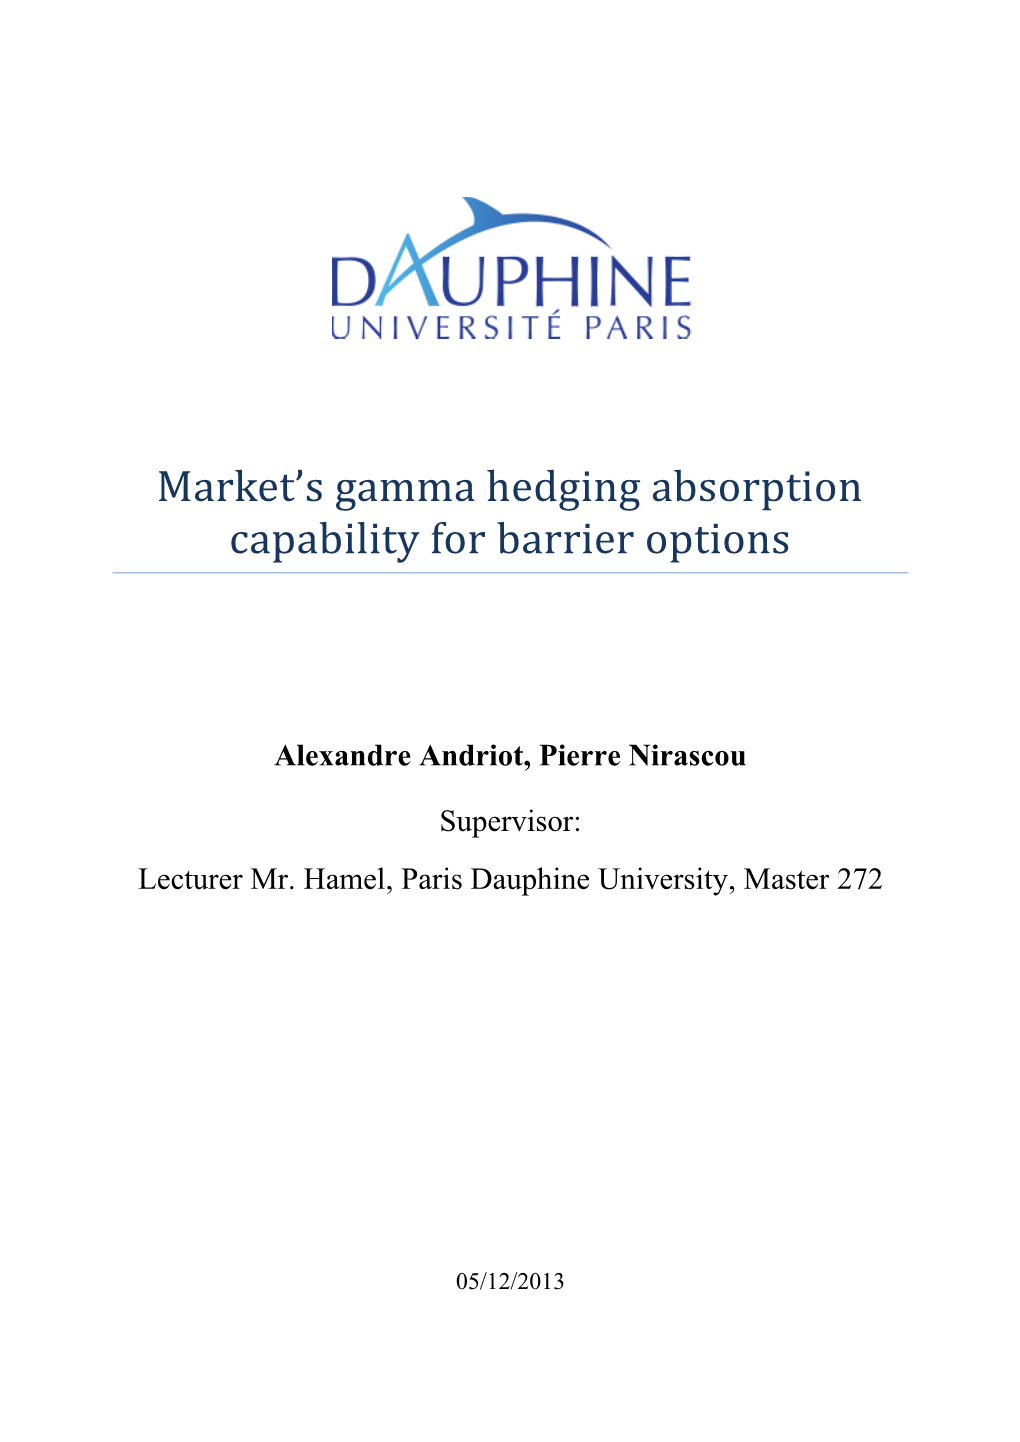 Market's Gamma Hedging Absorption Capability for Barrier Options